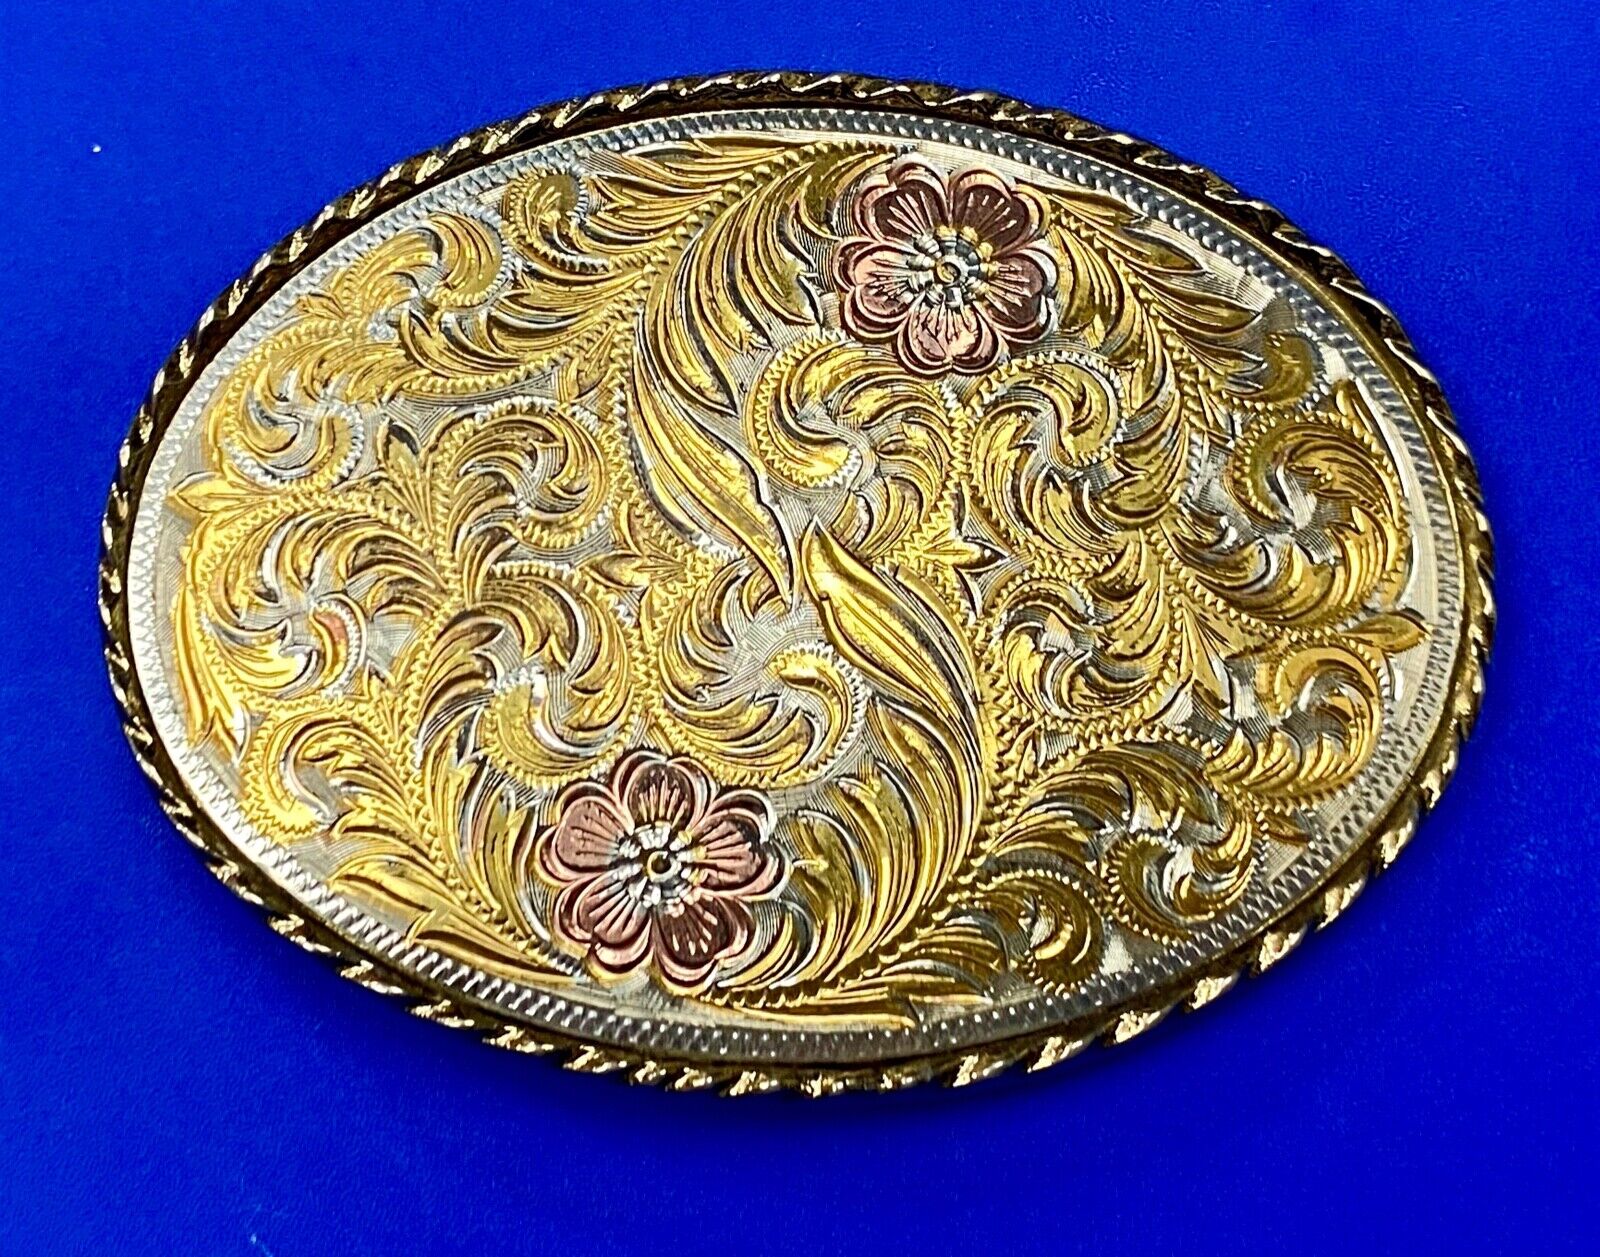 Mixed metal and color western oval cowboys cowgirls fancy belt buckle marked W